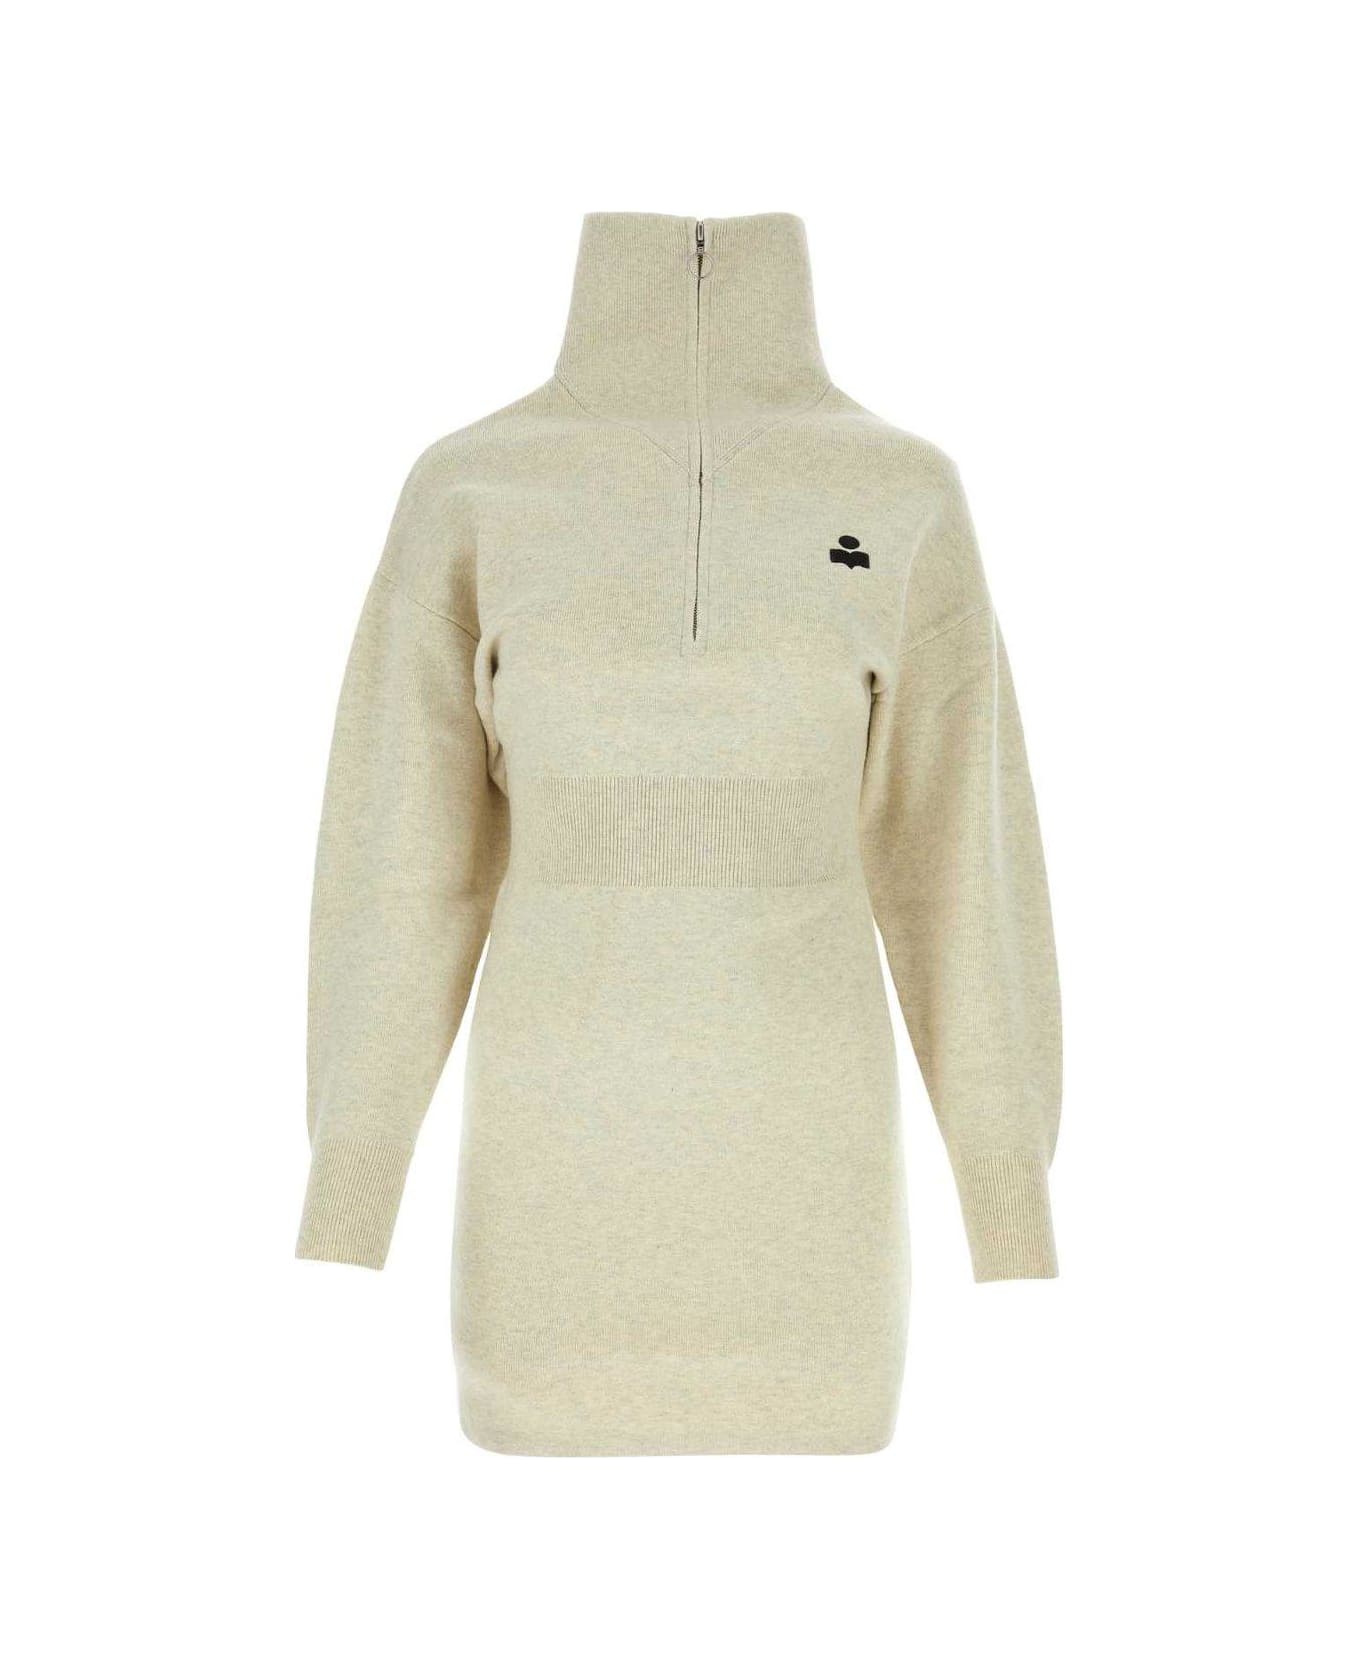 Marant Étoile Logo Embroidered High Neck Knitted Dress - GREY